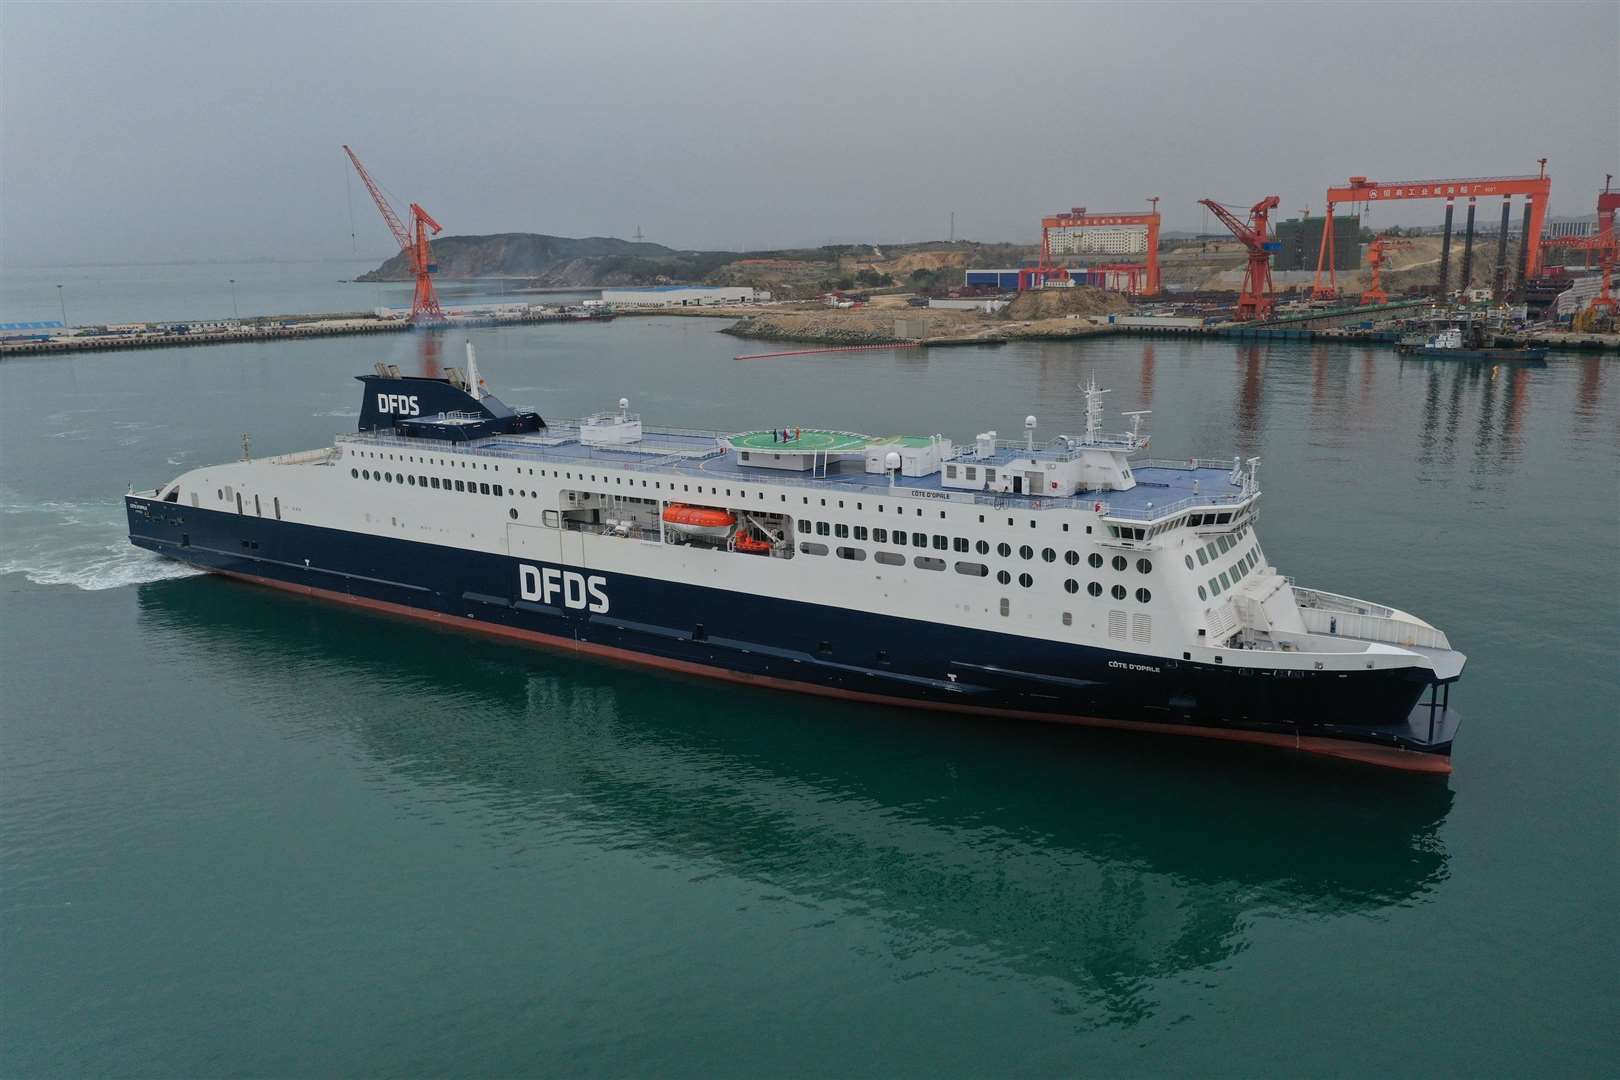 The new DFDS ferry Côte d’Opale left the Weihei shipyard in China in May. Picture: DFDS